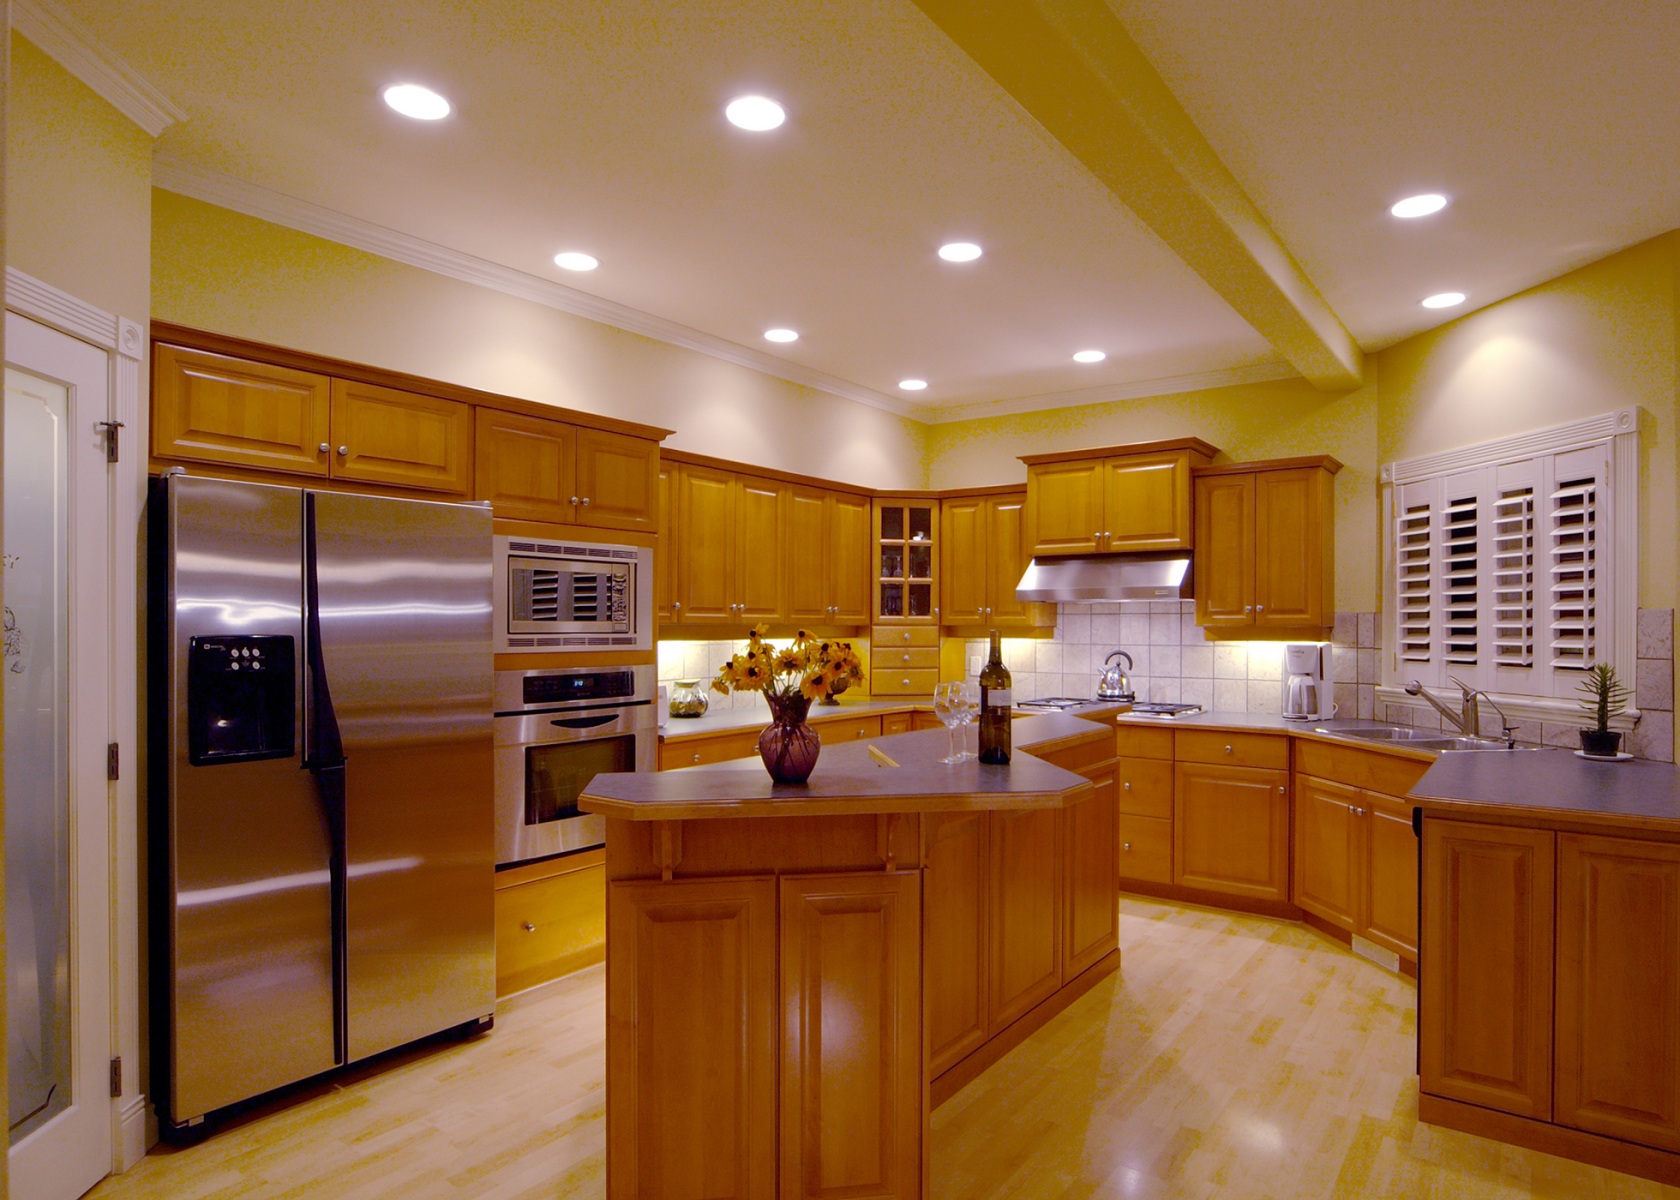 1_harmony_homes_carrs_landing_road_residence_kitchen_area_gallery_image_3